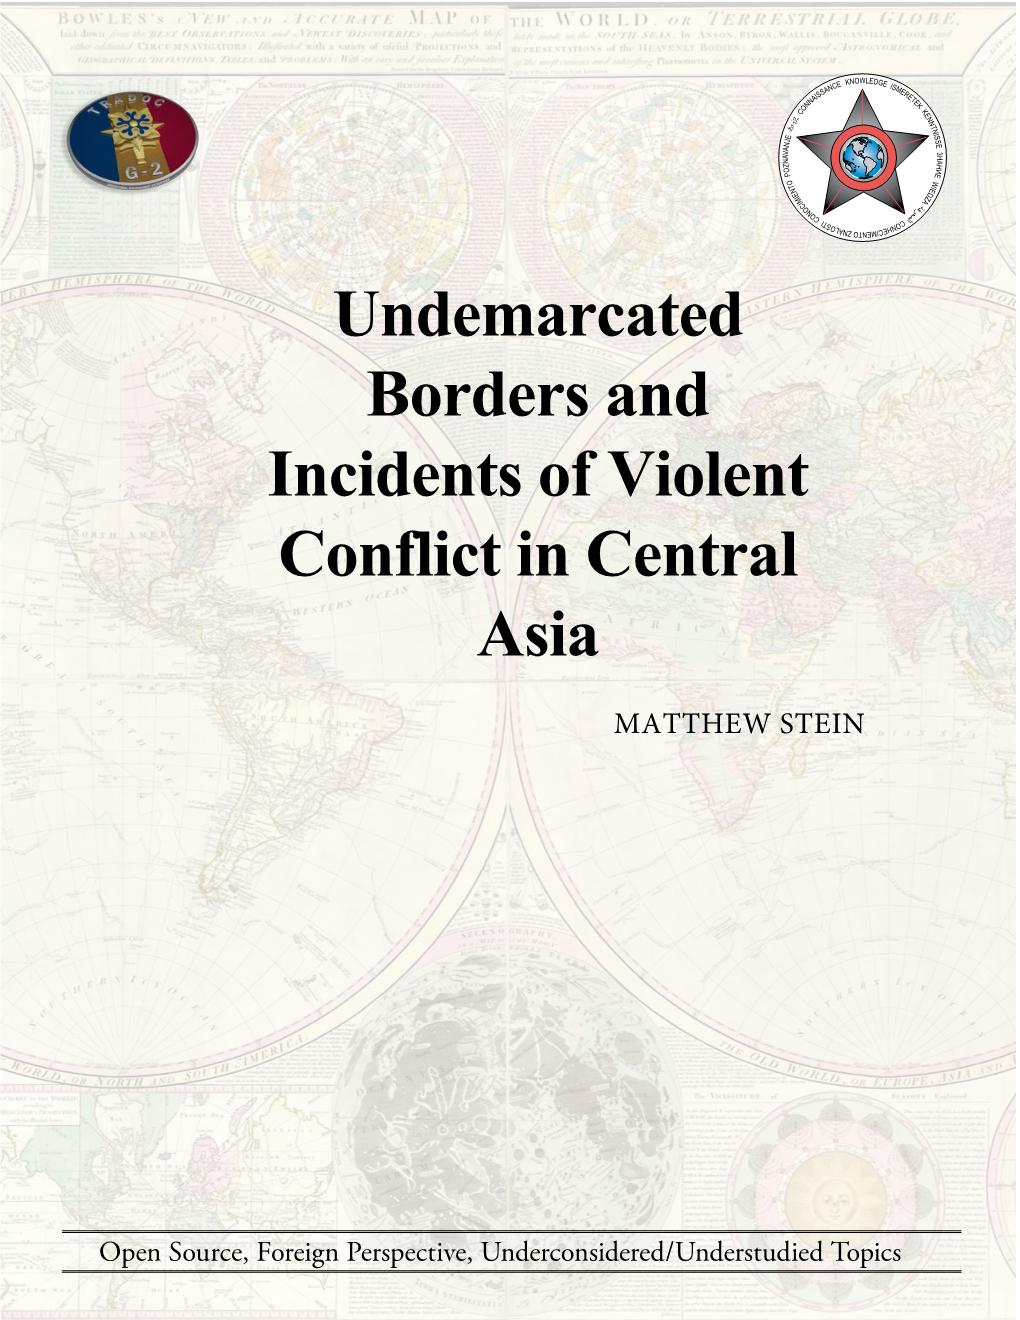 Undemarcated Borders and Incidents of Violent Conflict in Central Asia